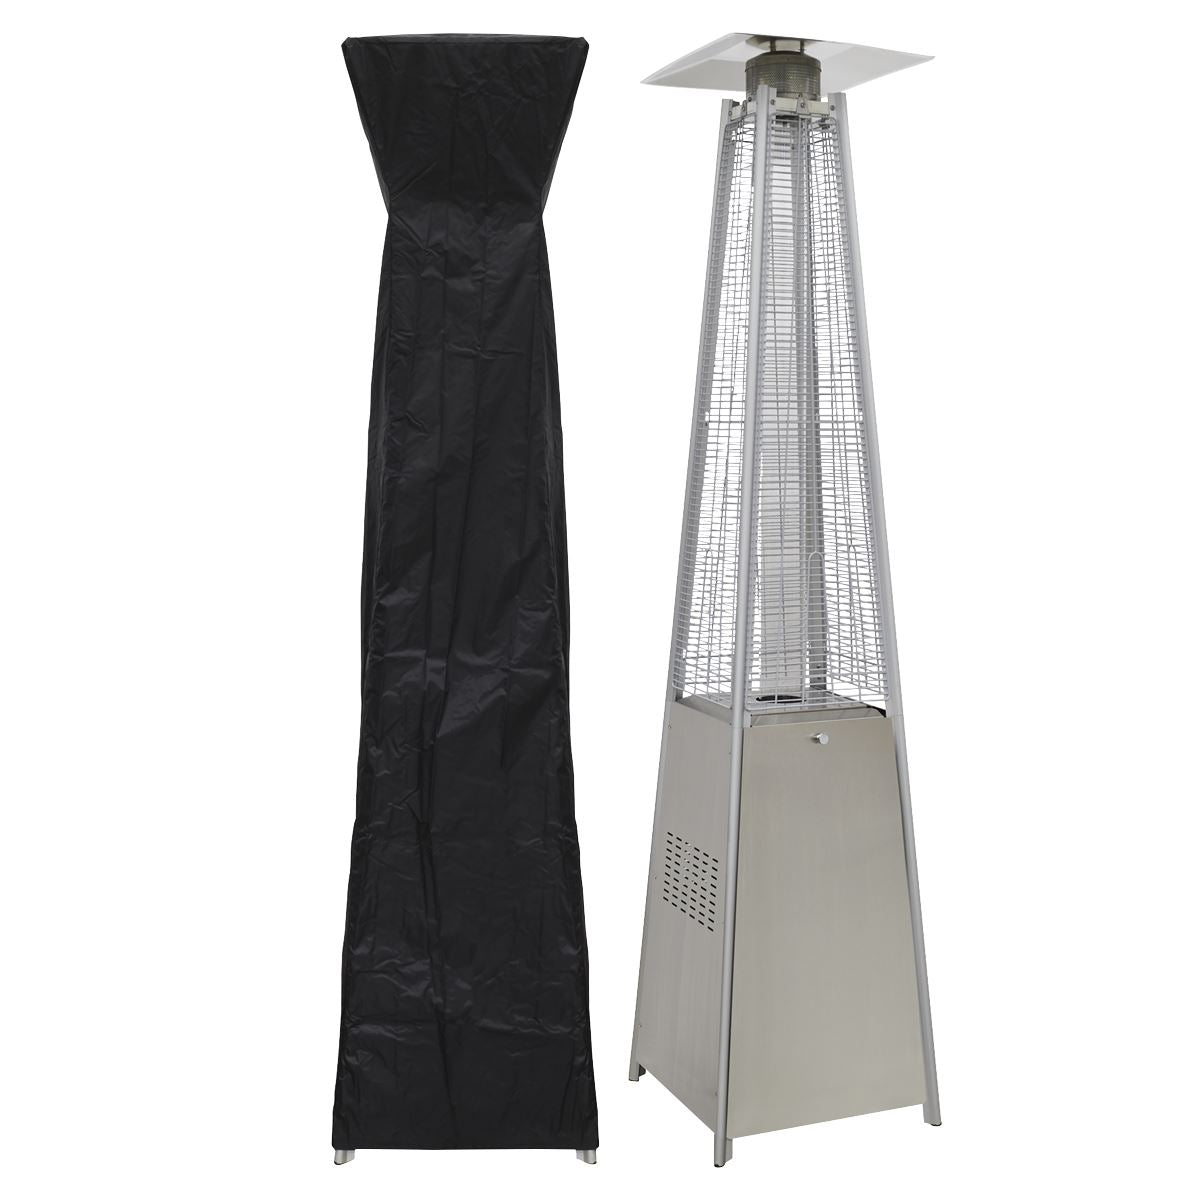 Dellonda Pyramid Gas Patio Heater 13kW for Commercial & Domestic Use, Stainless Steel, Supplied with Cover